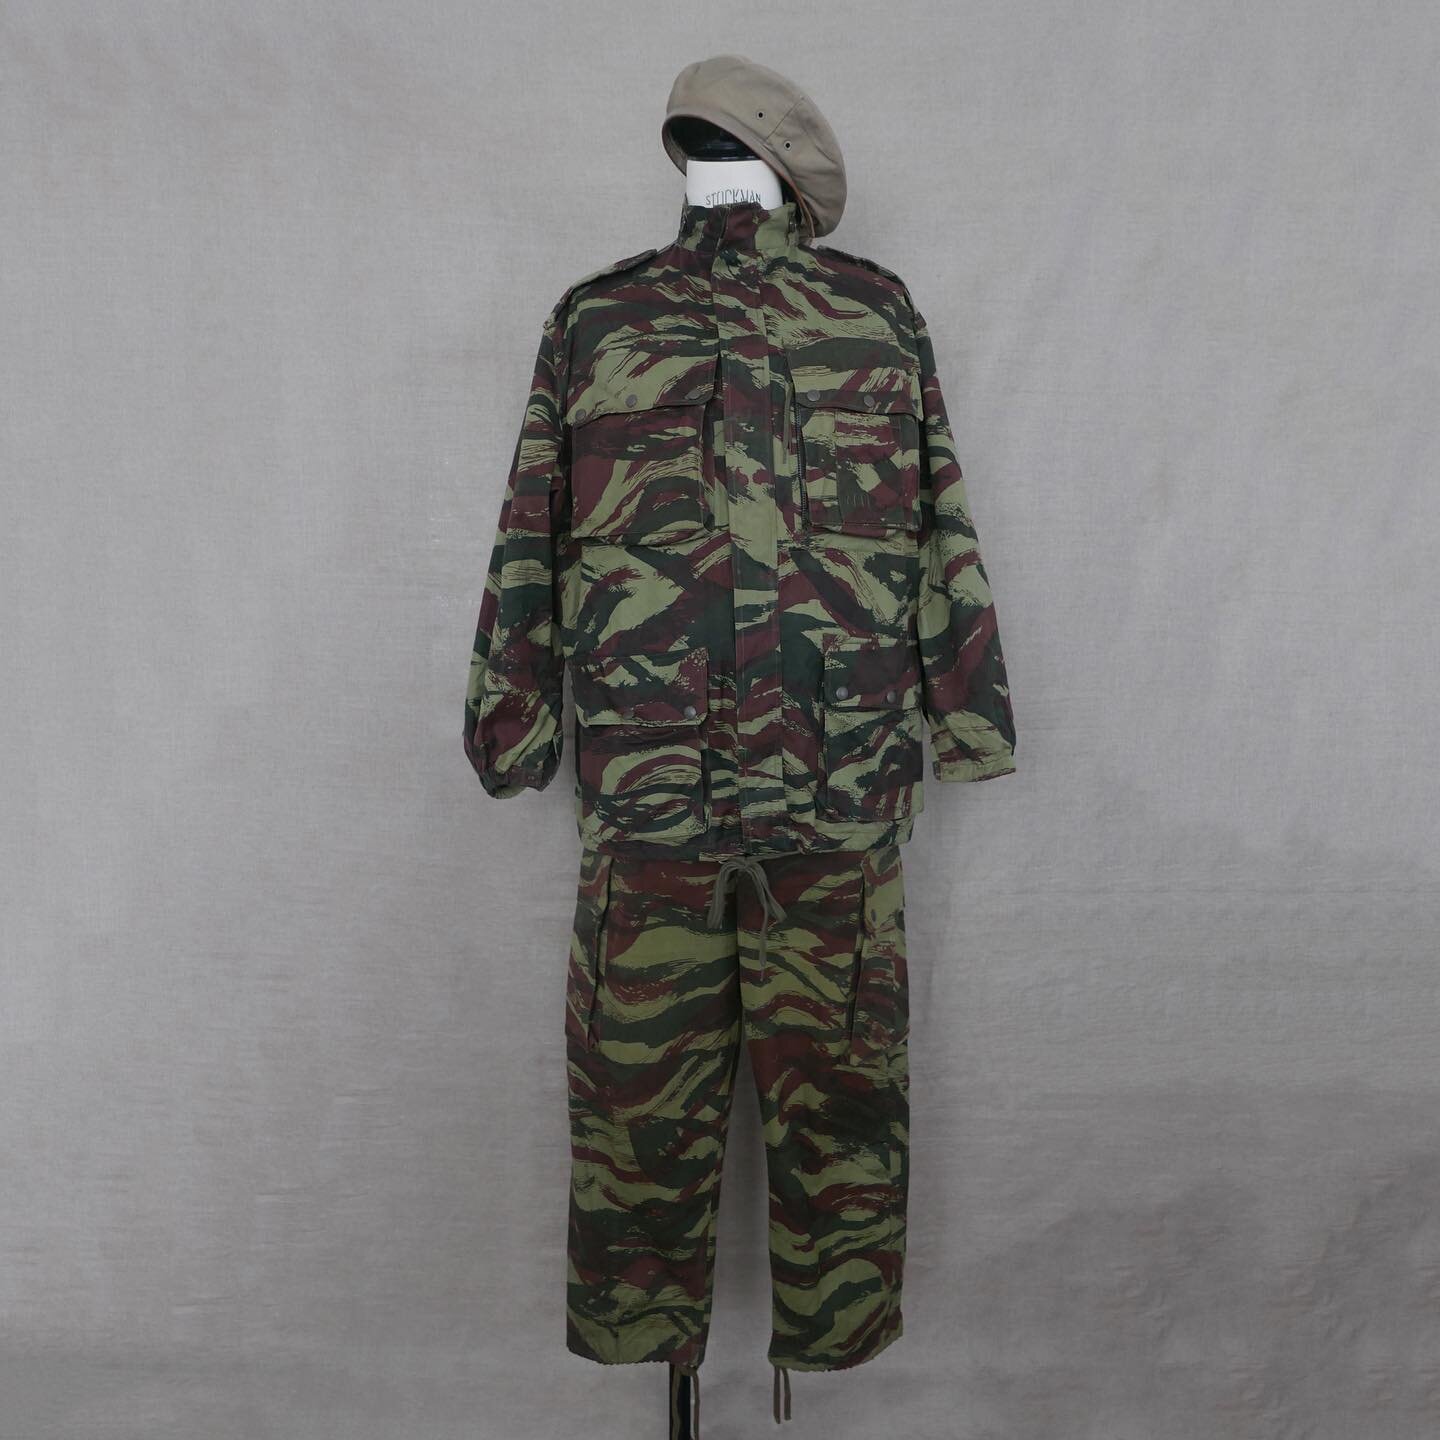 AVAILABLE / Deadstock French paratrooper 47/56 outfit / 60&acute;s era, Lizard camo.
.
.
Jacket size L and trousers military size 13 = waist 42cm. 
.
.
.
#vintage #militaria #workwear #m47 #menstyle #vintagestyle #igfashion #vintageclothing #military